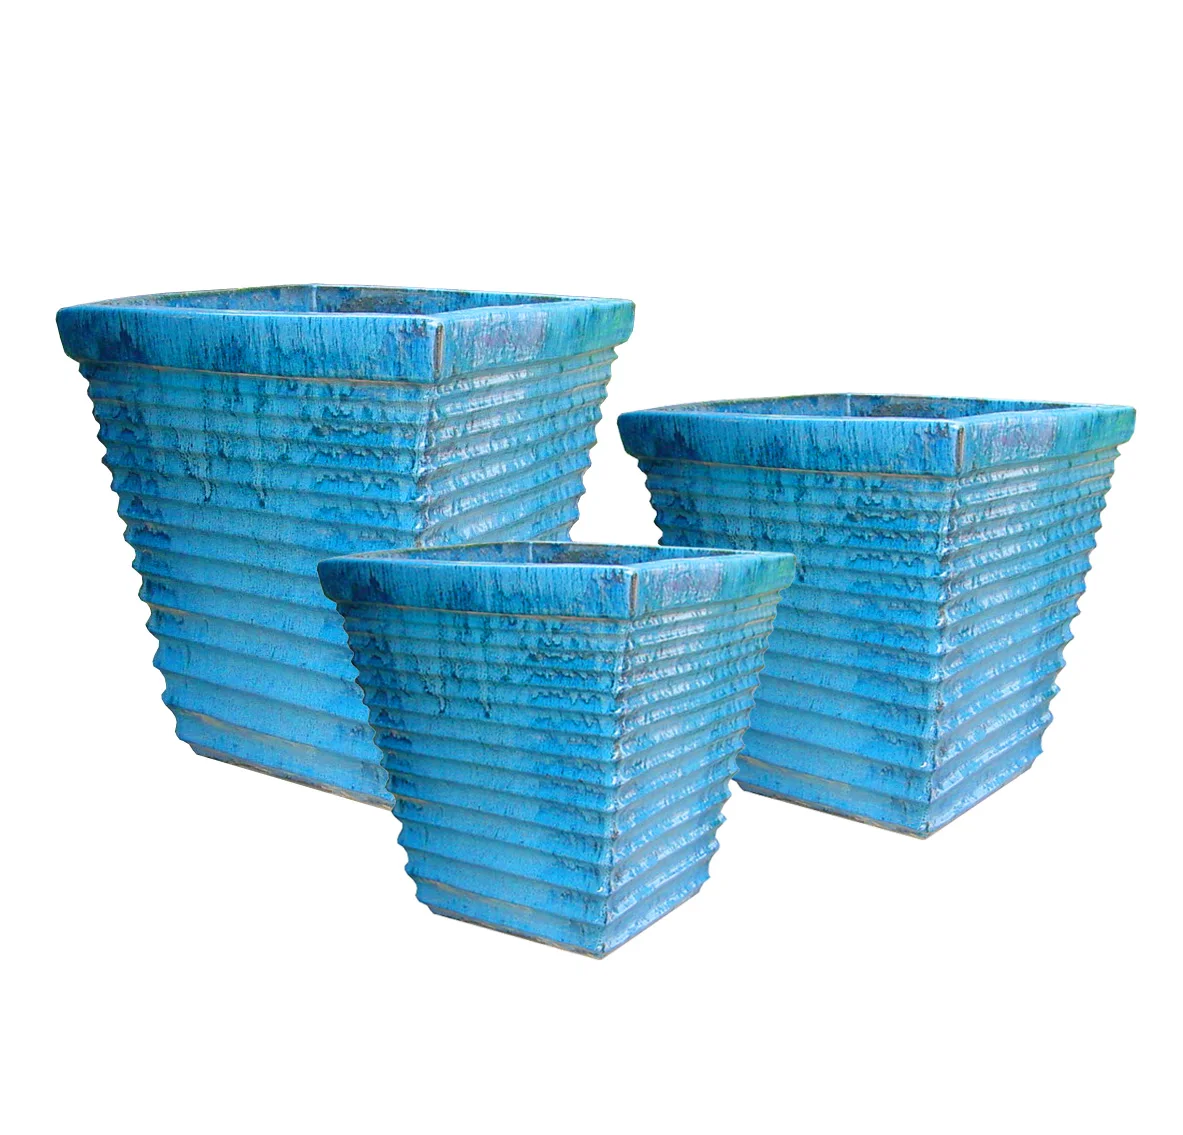 Wholesale Ceramic Flower Pots Kit Glazed Outdoor Garden Planter for Home Nursery Room Floor Use Available in Small Large Sizes